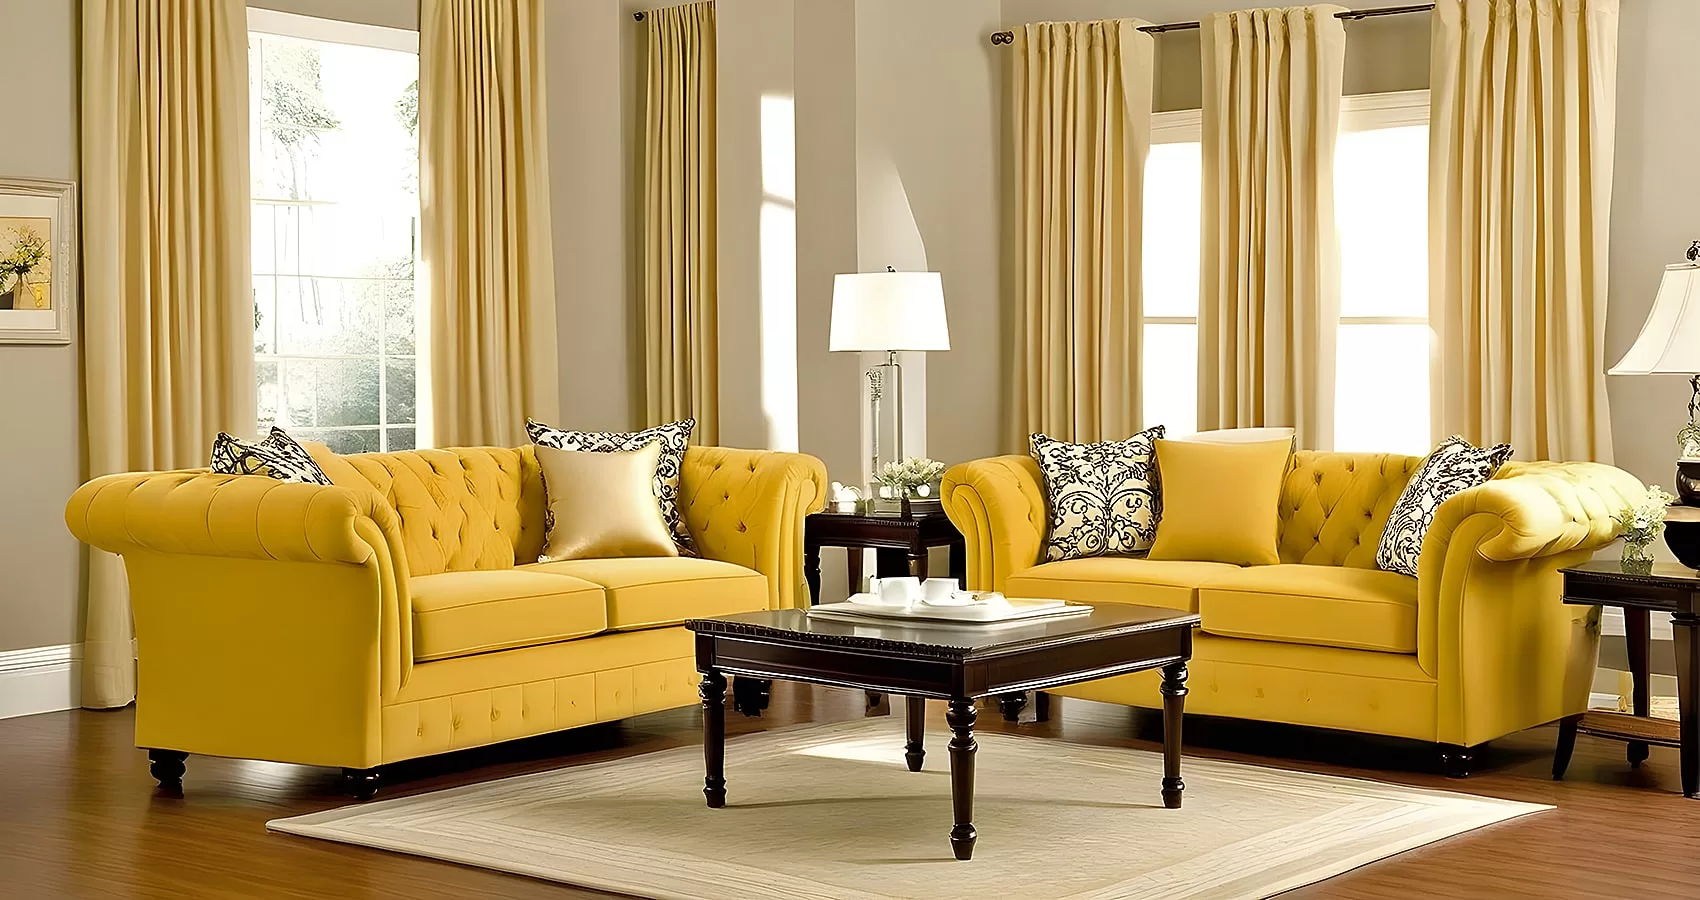 Living Room with Yellow Couch | Yellow Couch Living Room Ideas | Yellow Couch Living Room | Yellow Sofa Living Room